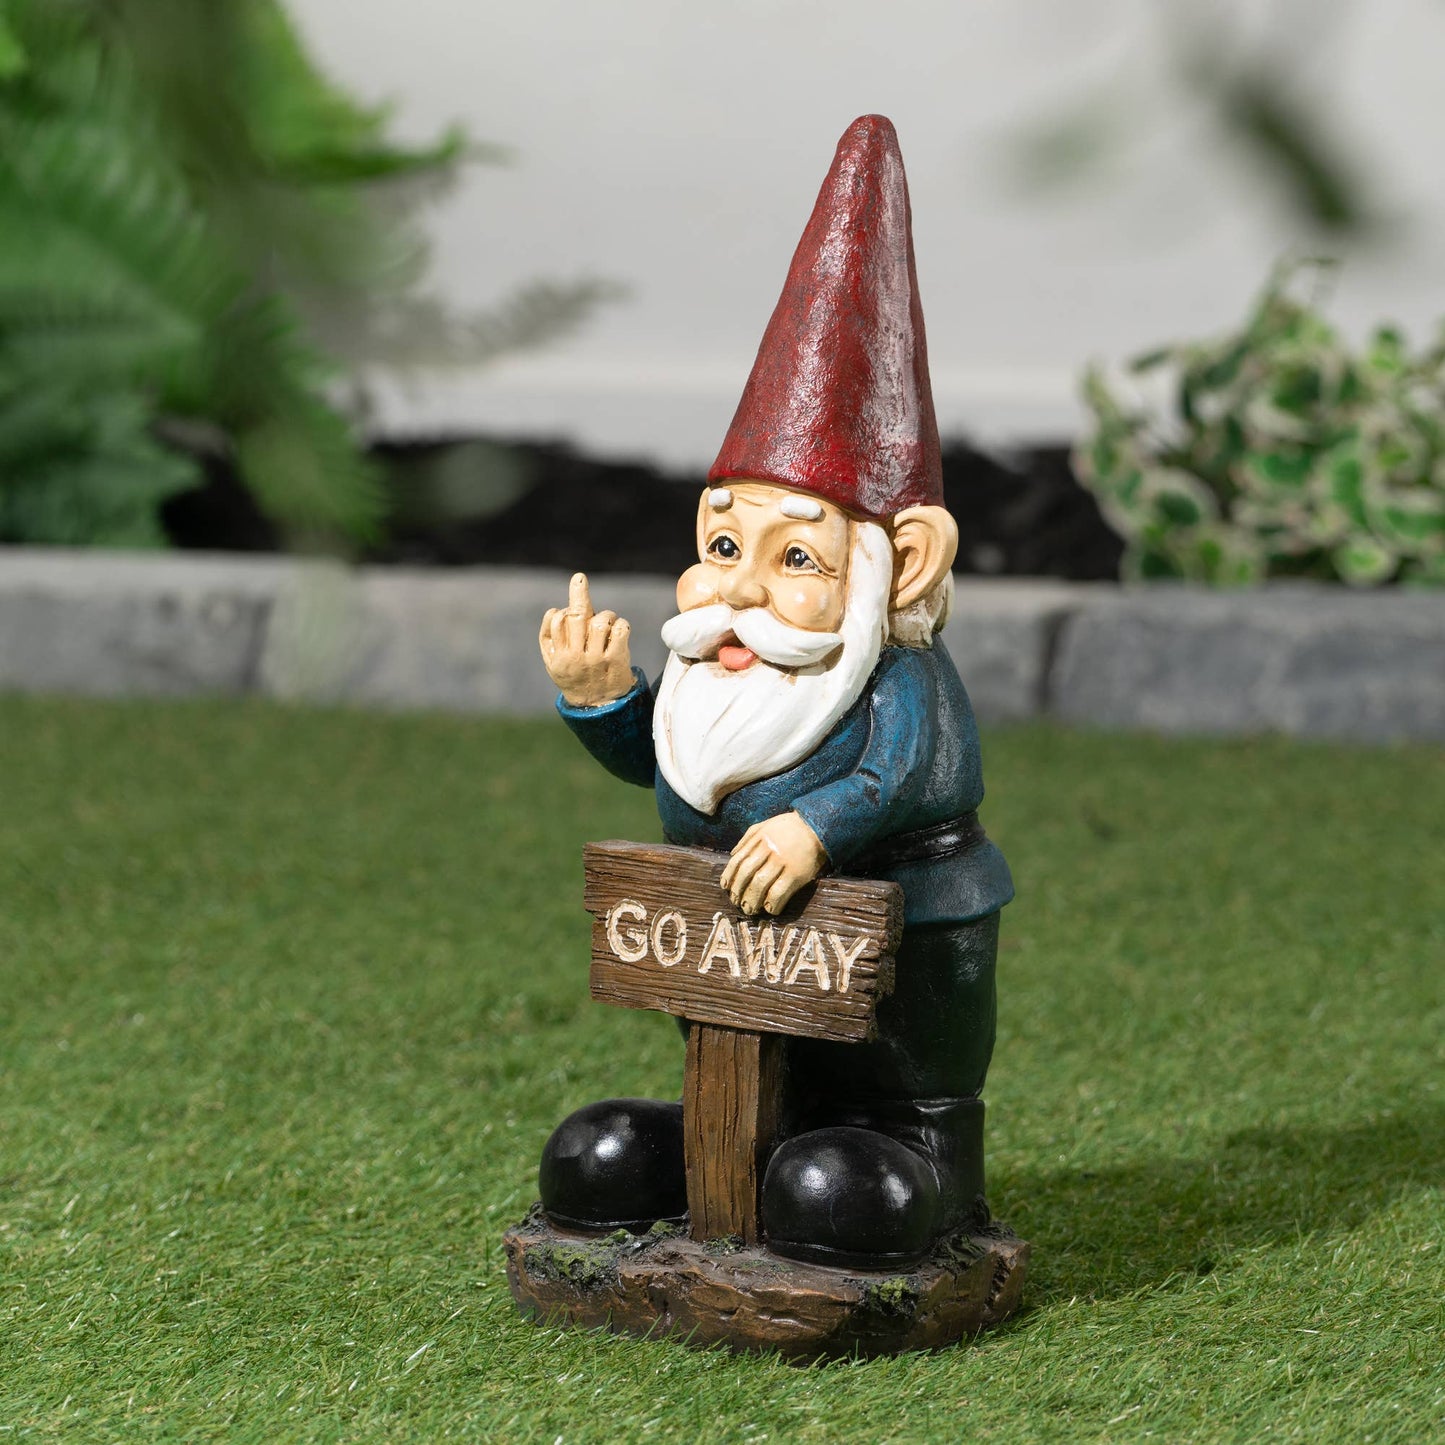 Gnome Holding A Go Away Sign